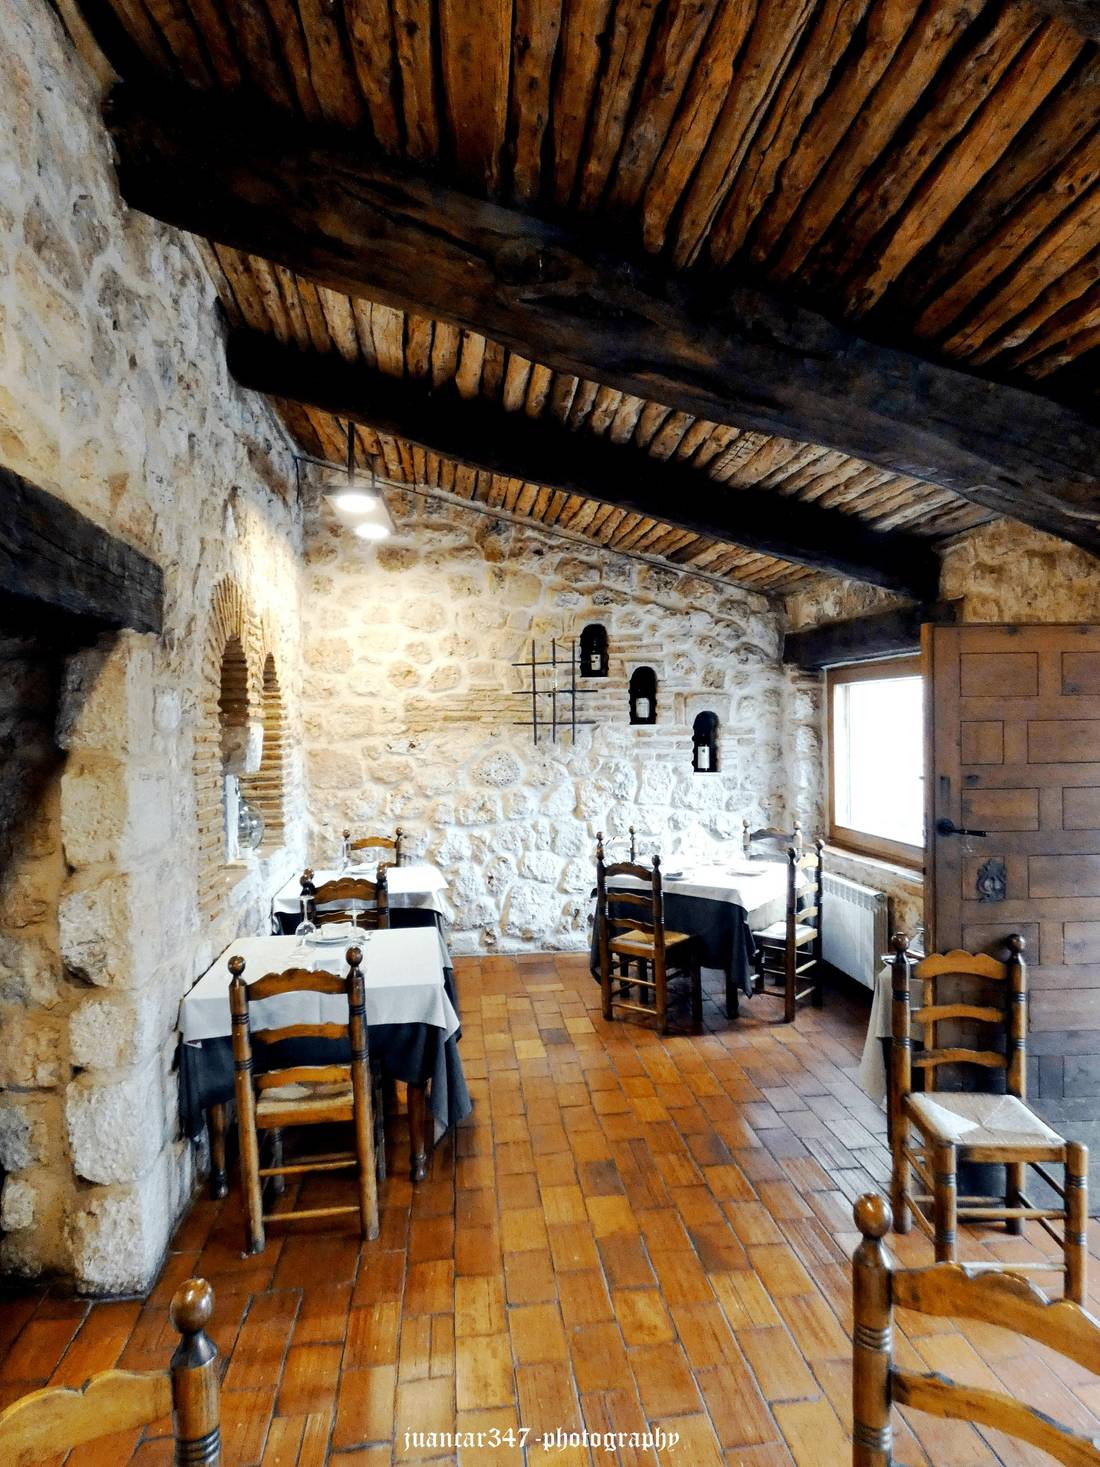 Overview of the interior of the restaurant